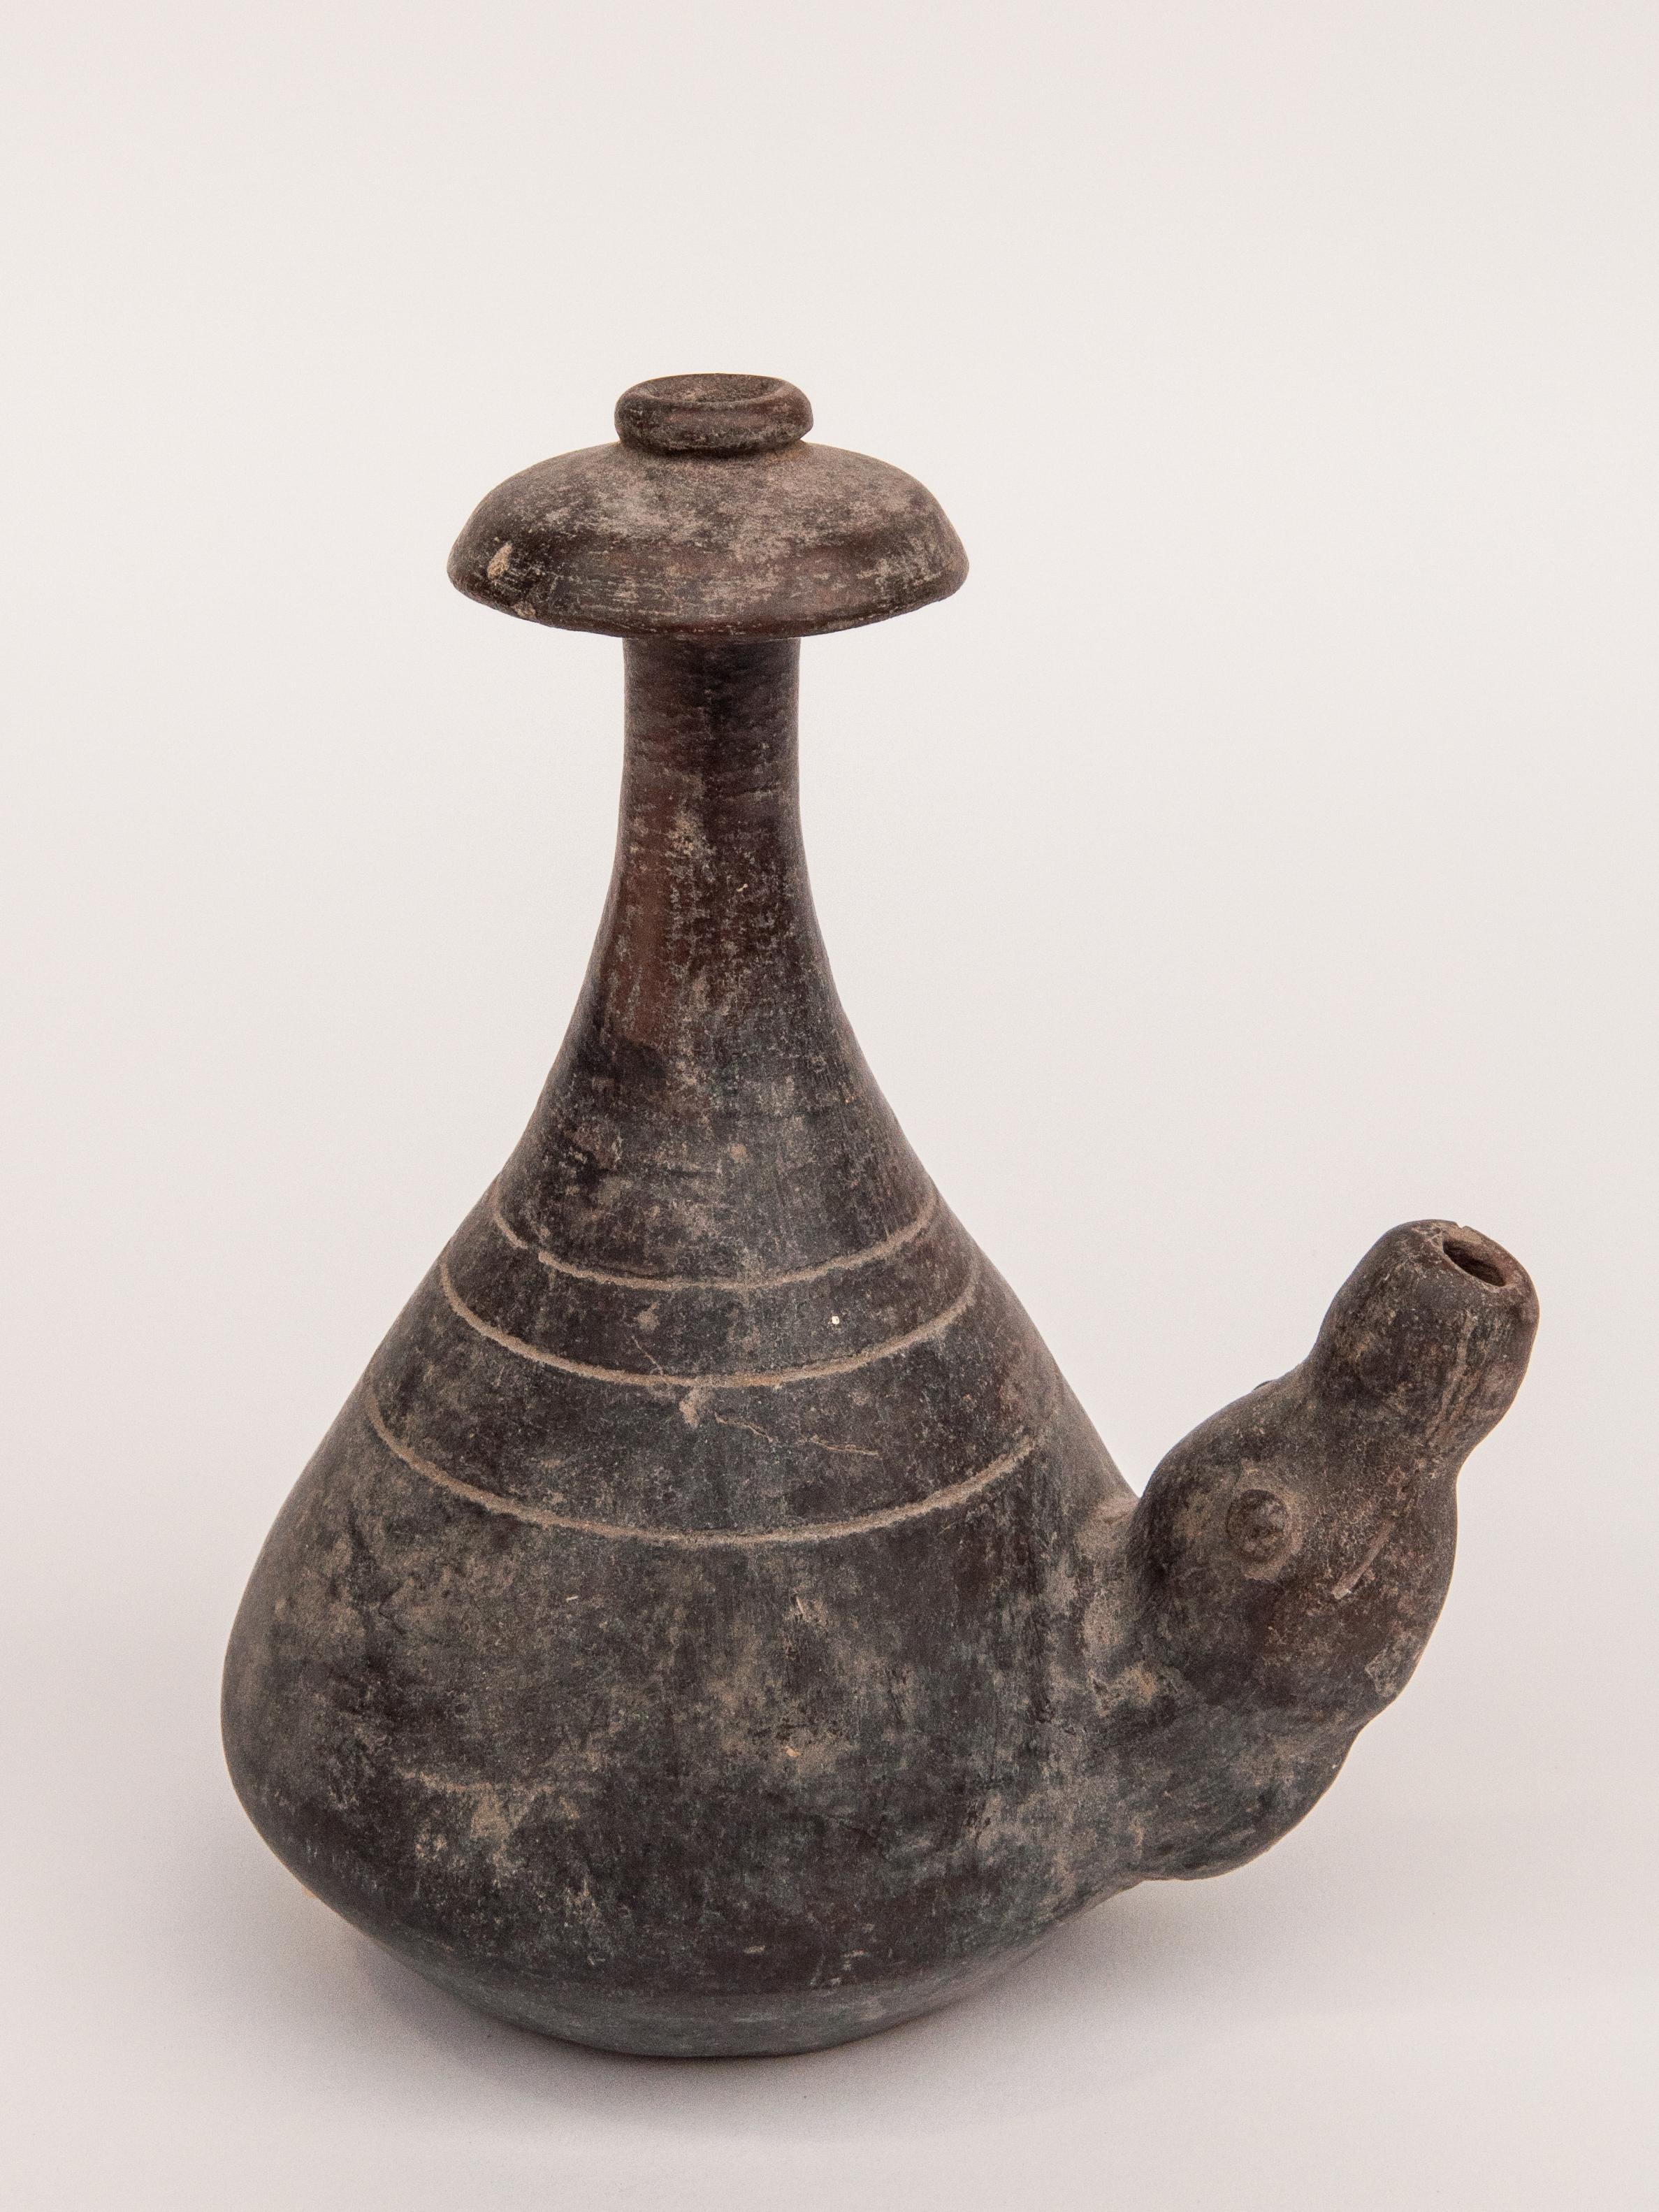 Old Earthenware Kendi, Majapahit Style, North or East Java, Late 19th Century 1